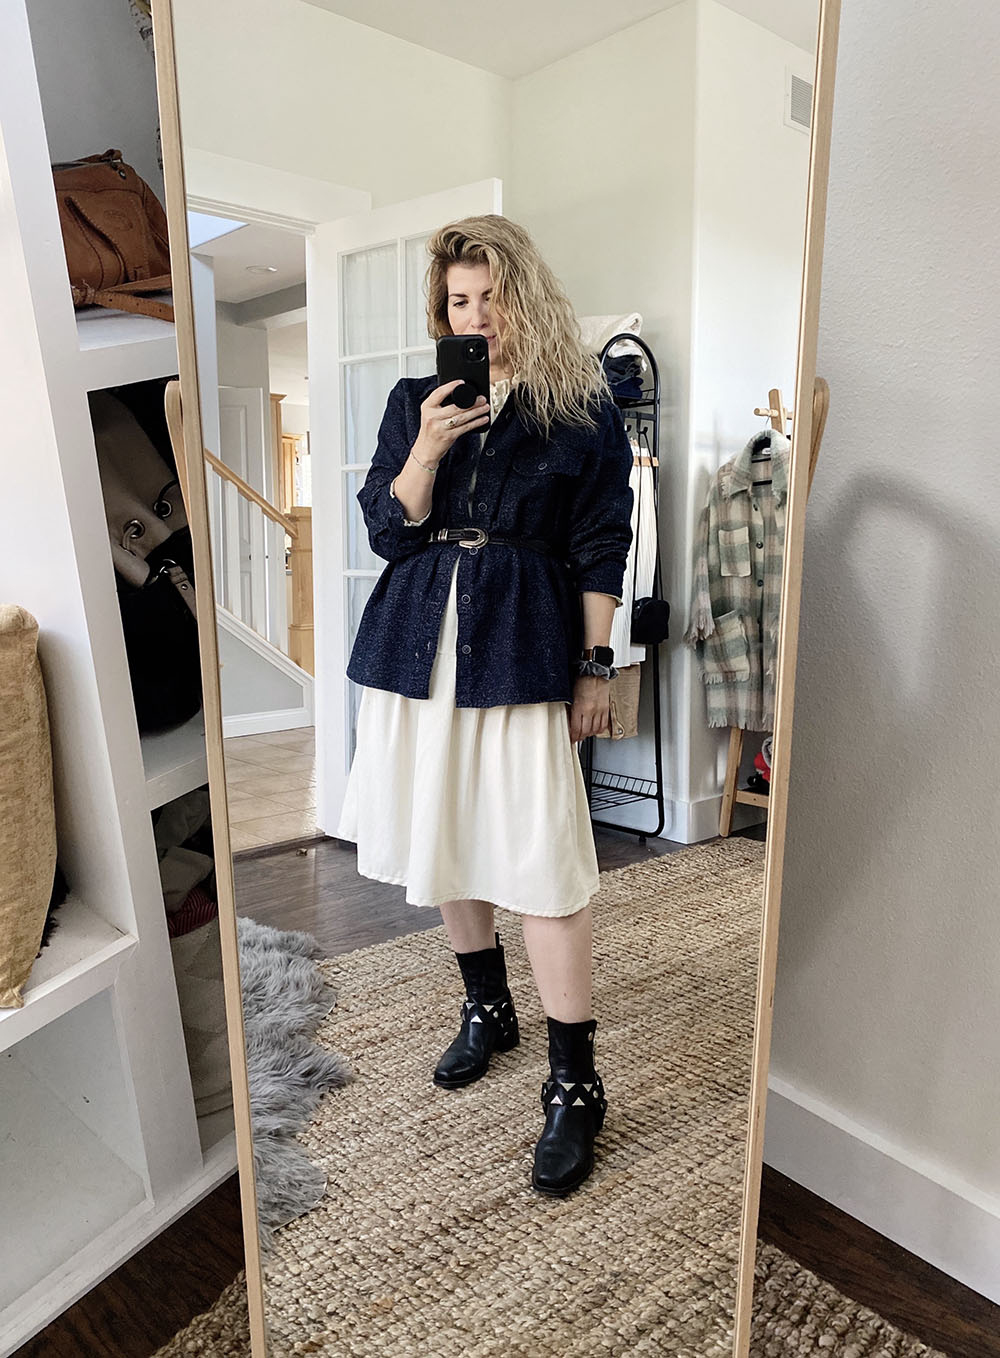 A white woman with blonde wavy hair is wearing a navy blue shirt unbuttoned over a cream colored dress. She has the shirt and dress belted at the waist with a black belt with a silver buckle. She is wearing black moto boots with silver arrow detailing.